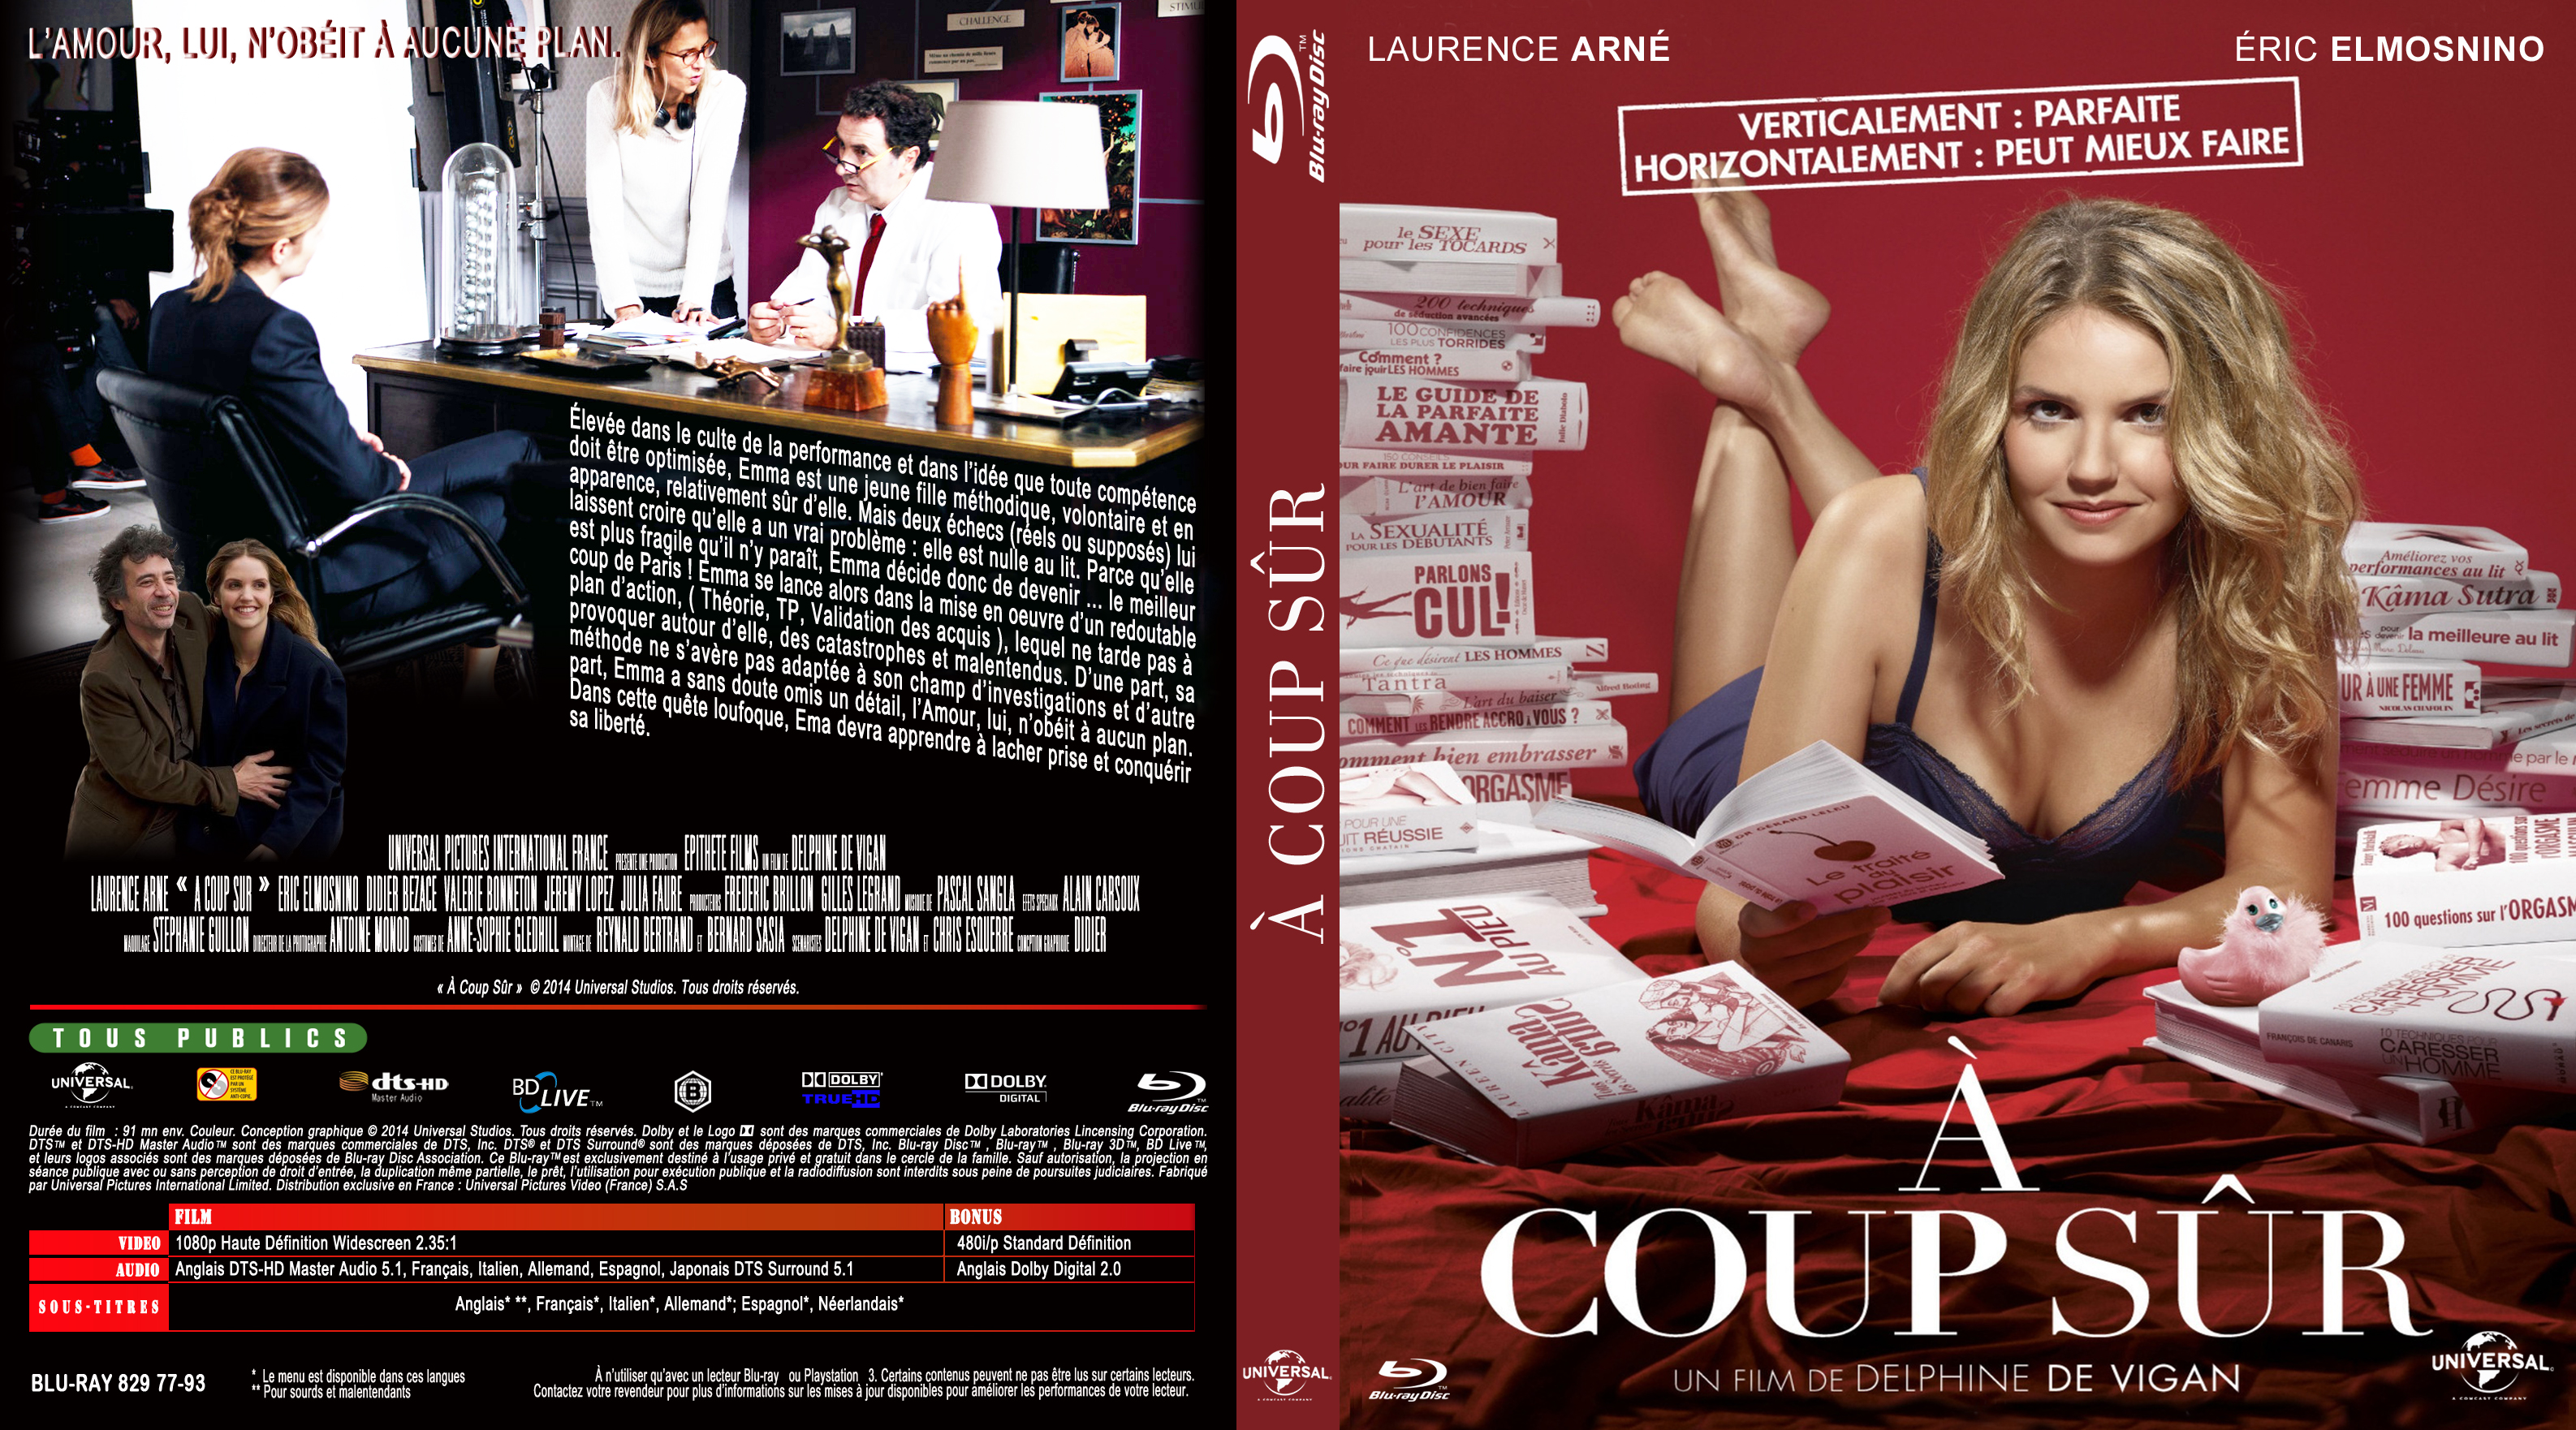 Jaquette DVD A coup sur custom (BLU-RAY)